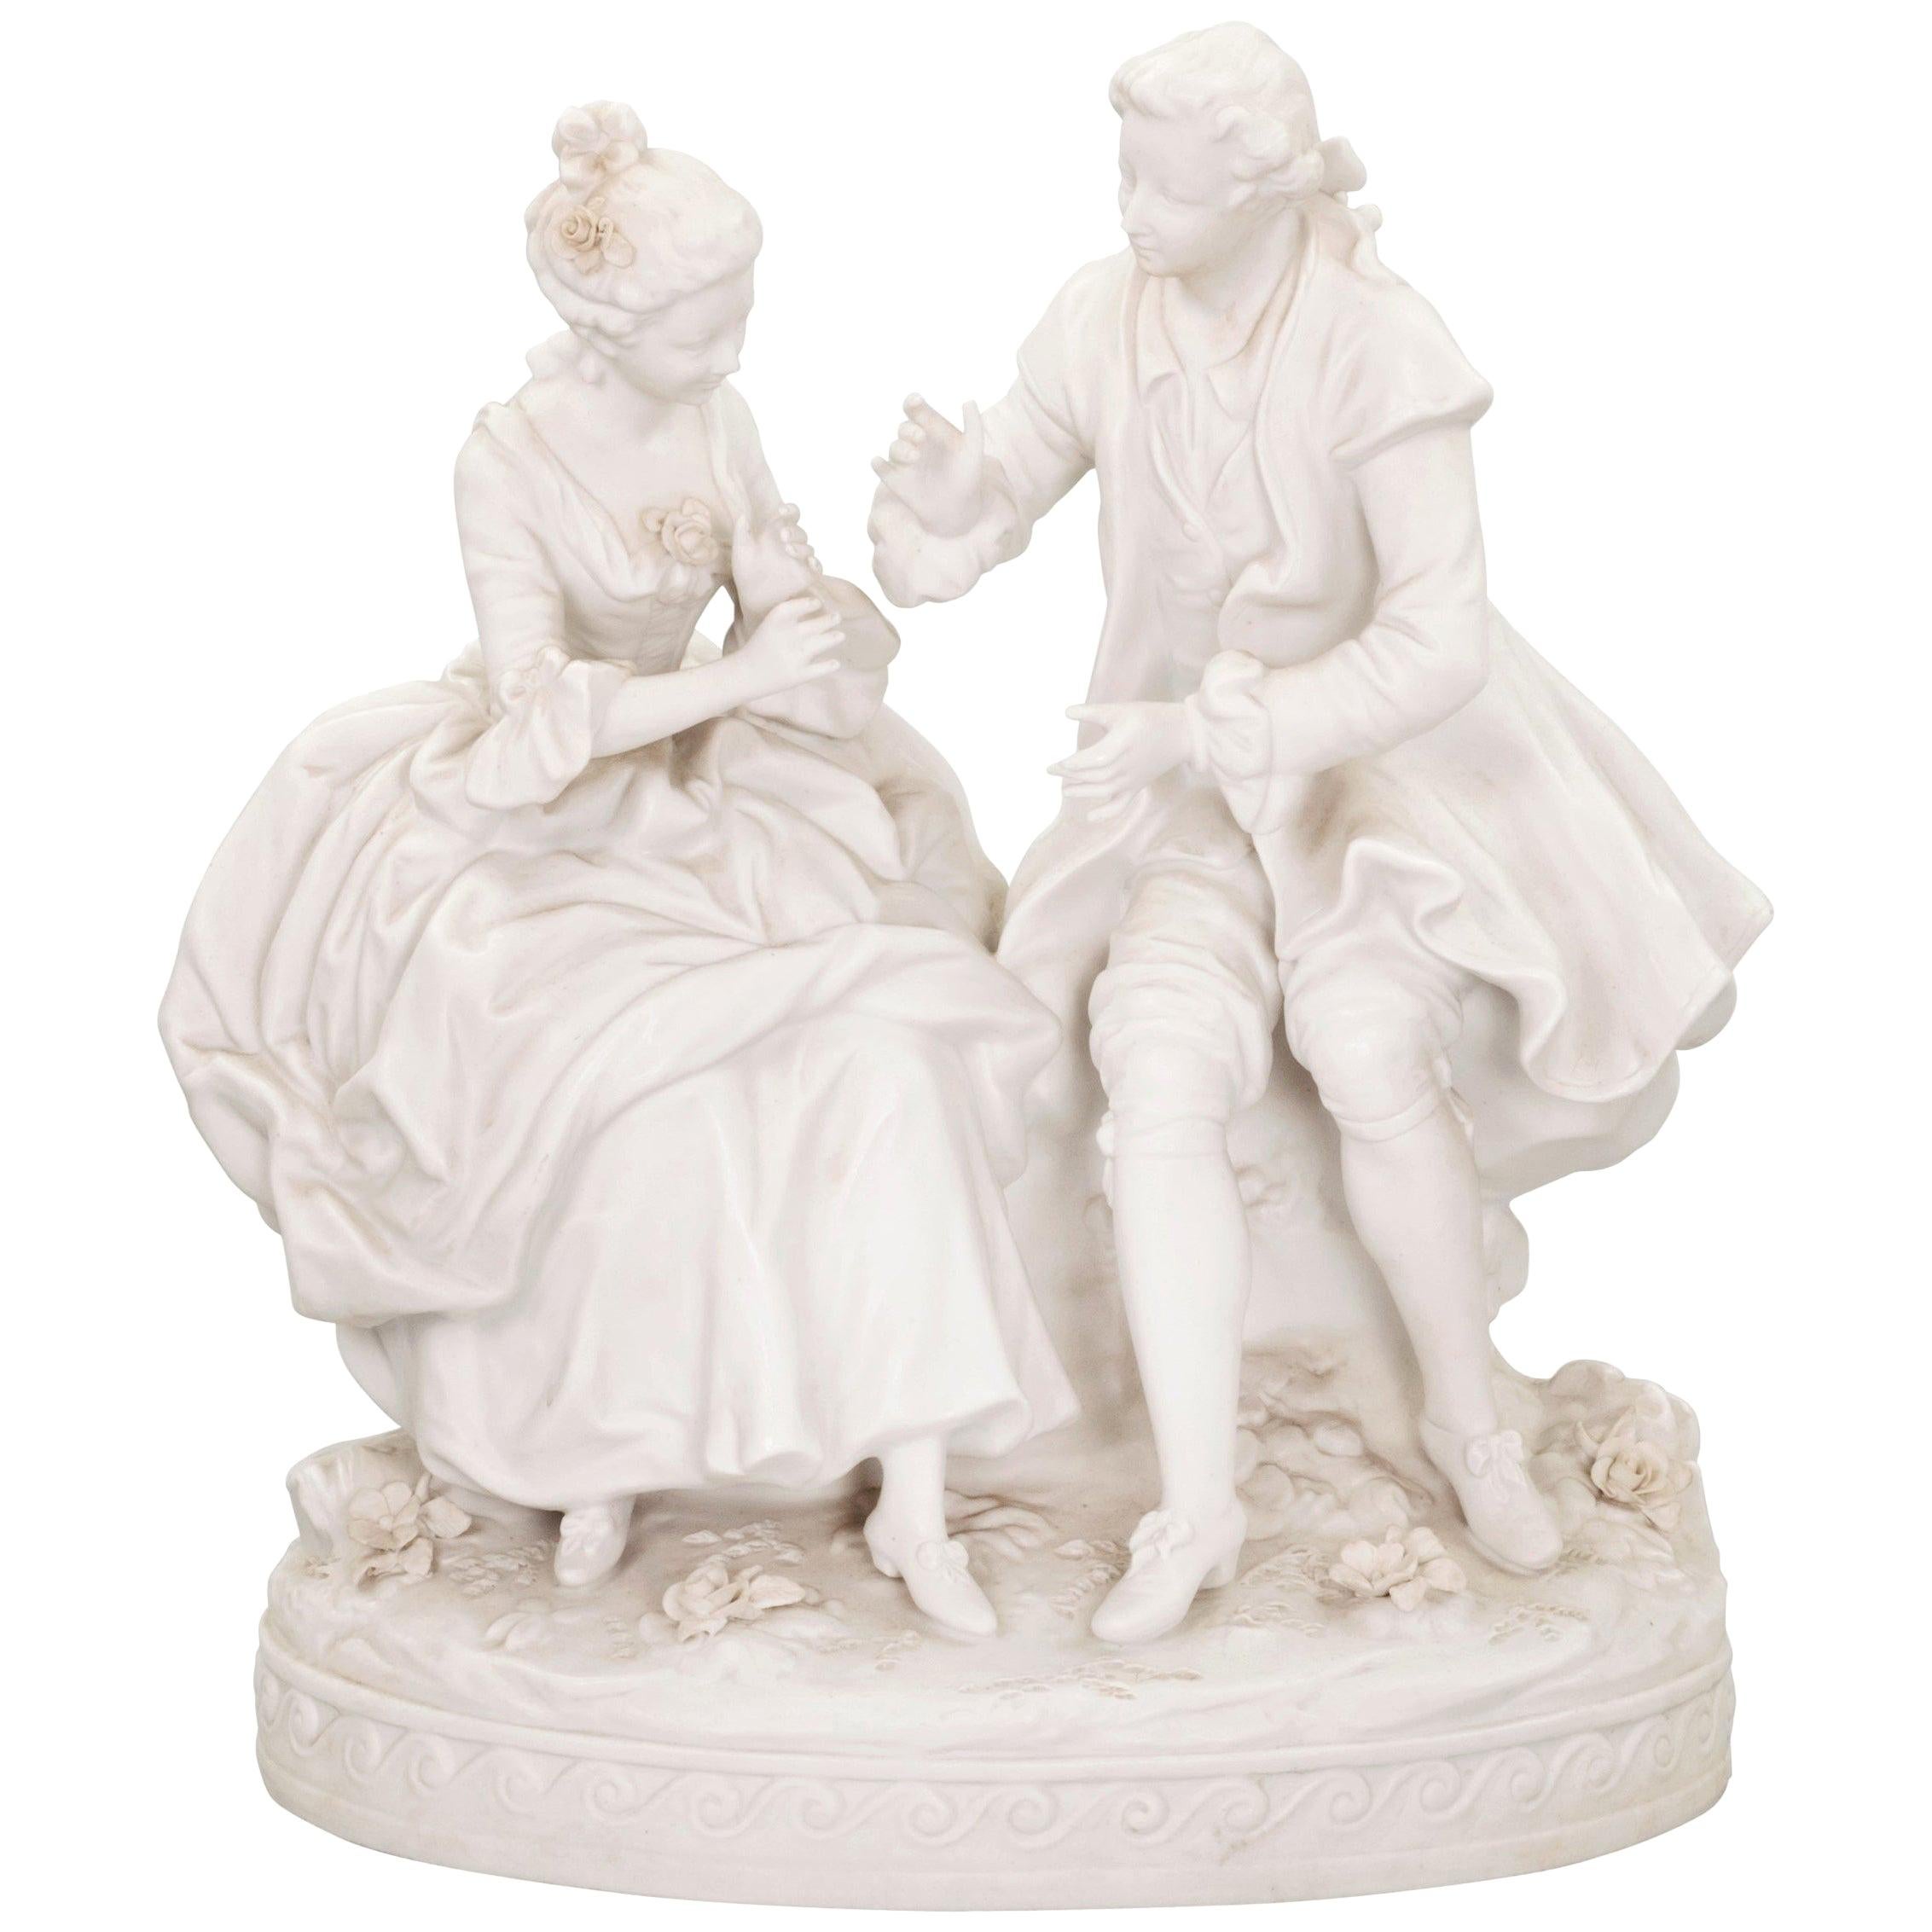 Bisque Porcelain Couple in Conversation, French, 19th Century